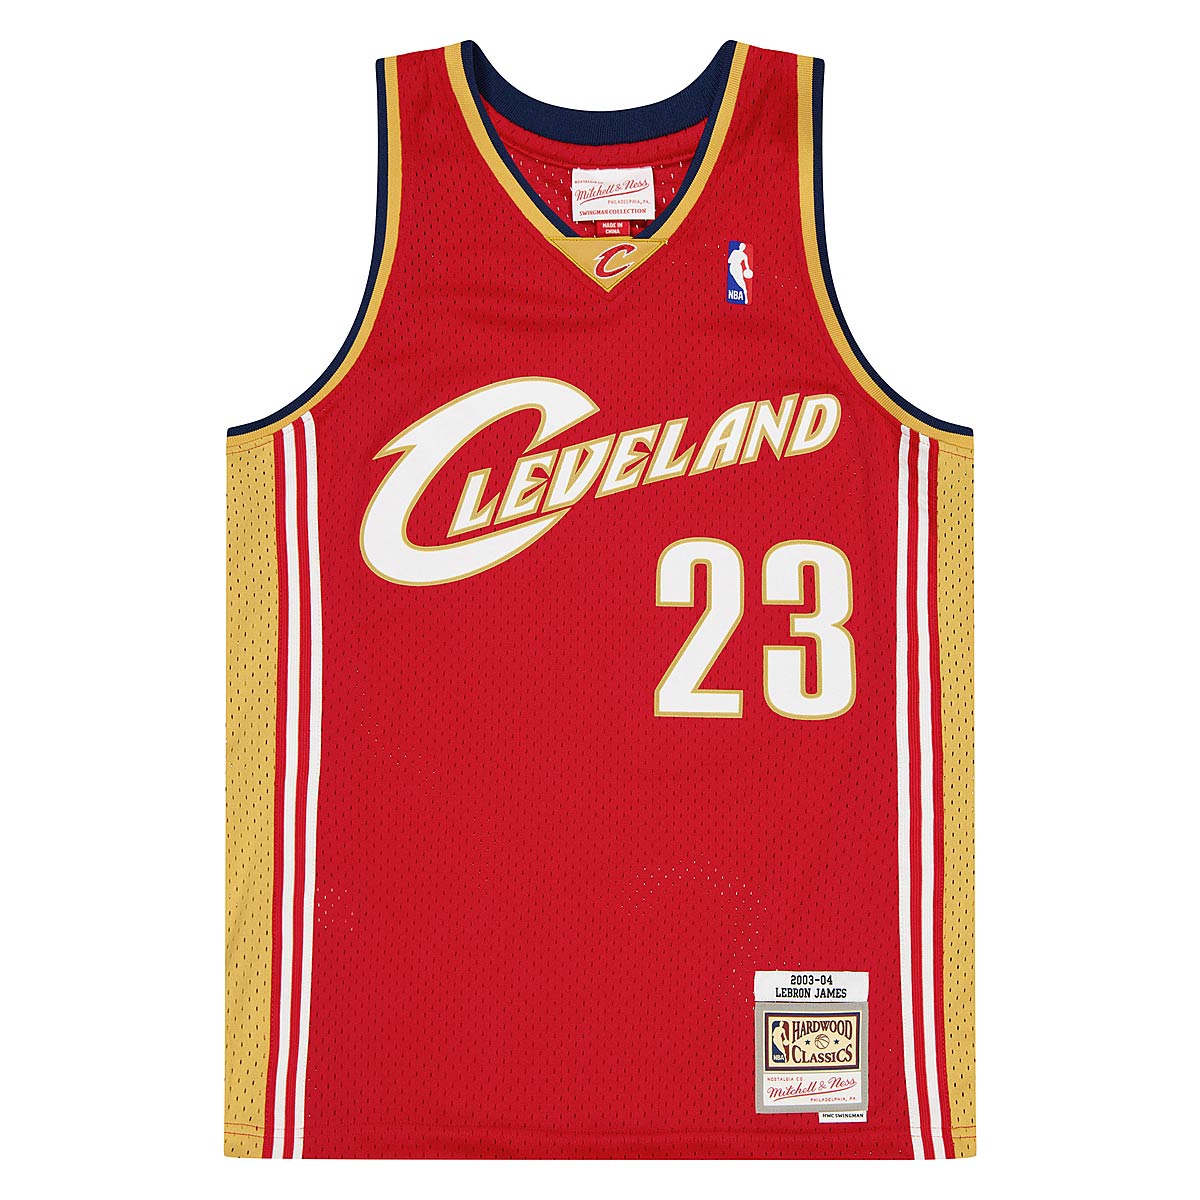 🐶Lebron James ASG 2018 Cleveland Cavaliers Jersey